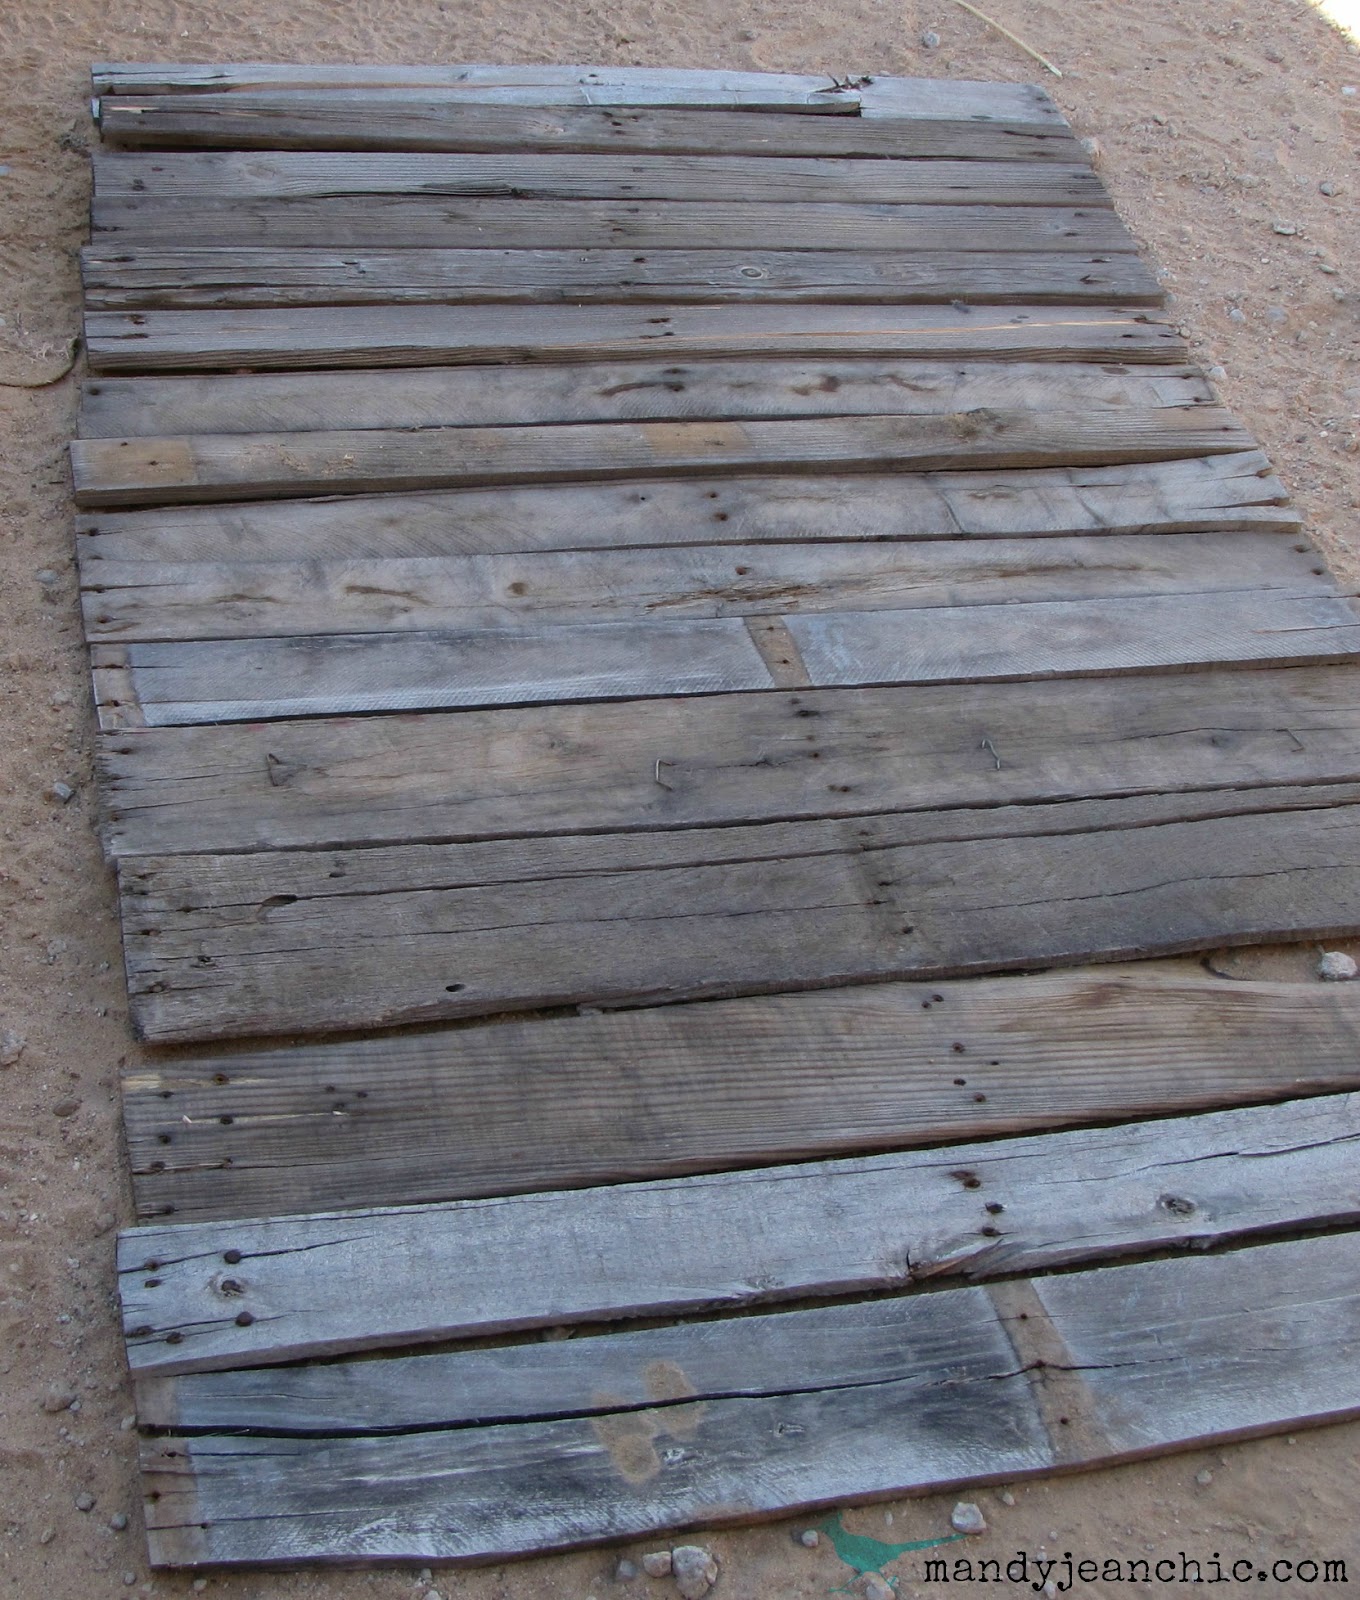 For this DIY you can use fence slats, barn wood,or old pallets.